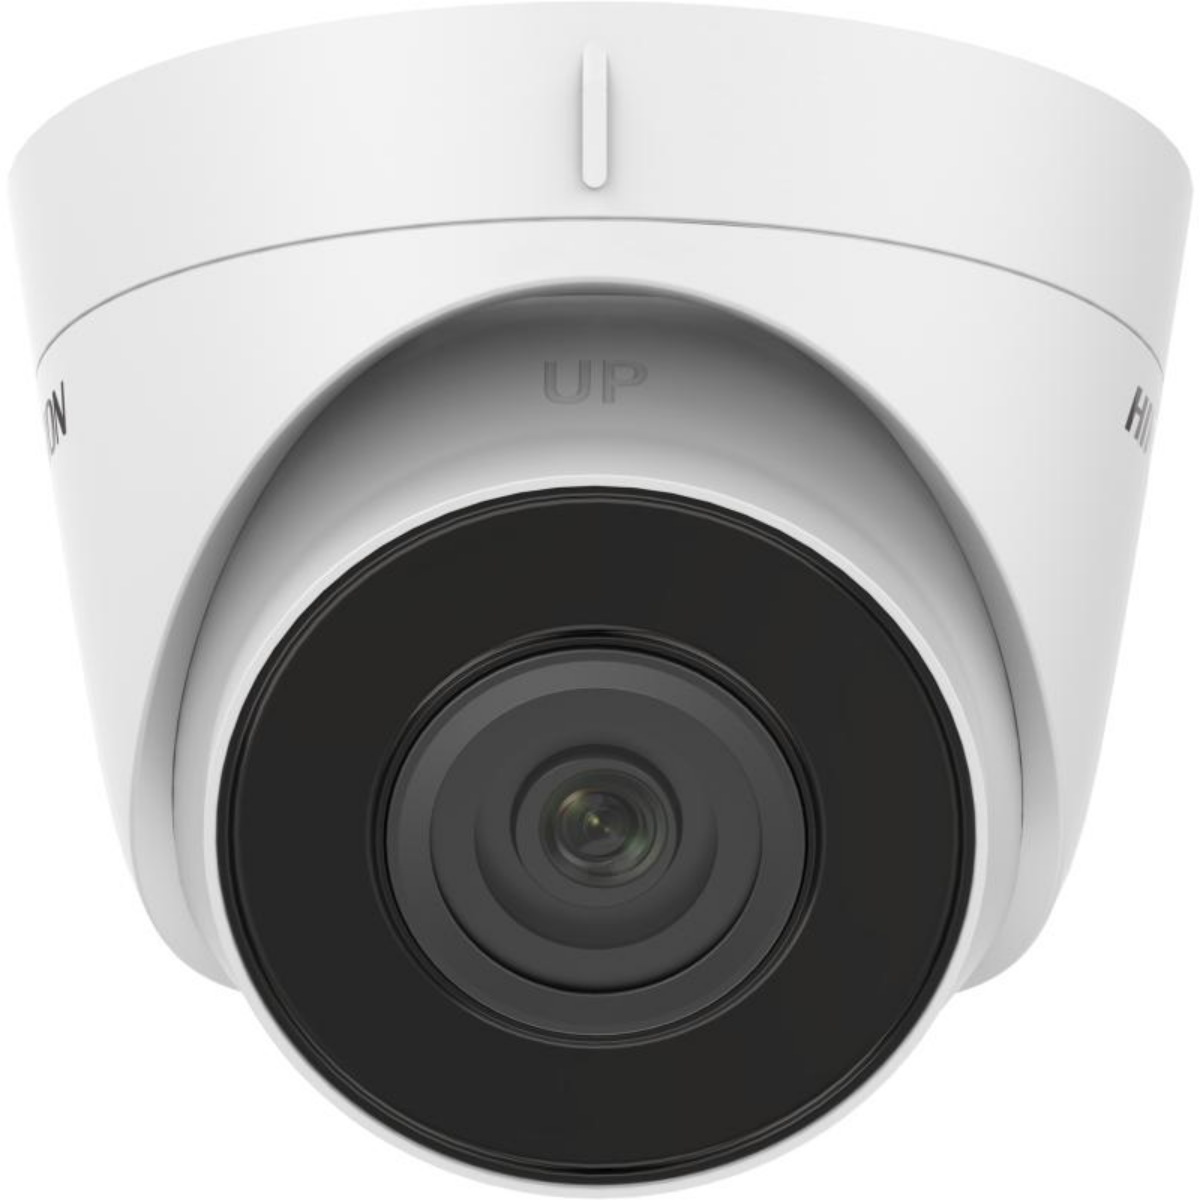 Hikvision  2 MP Fixed Bullet Network Camera – DS-2CD1321-I